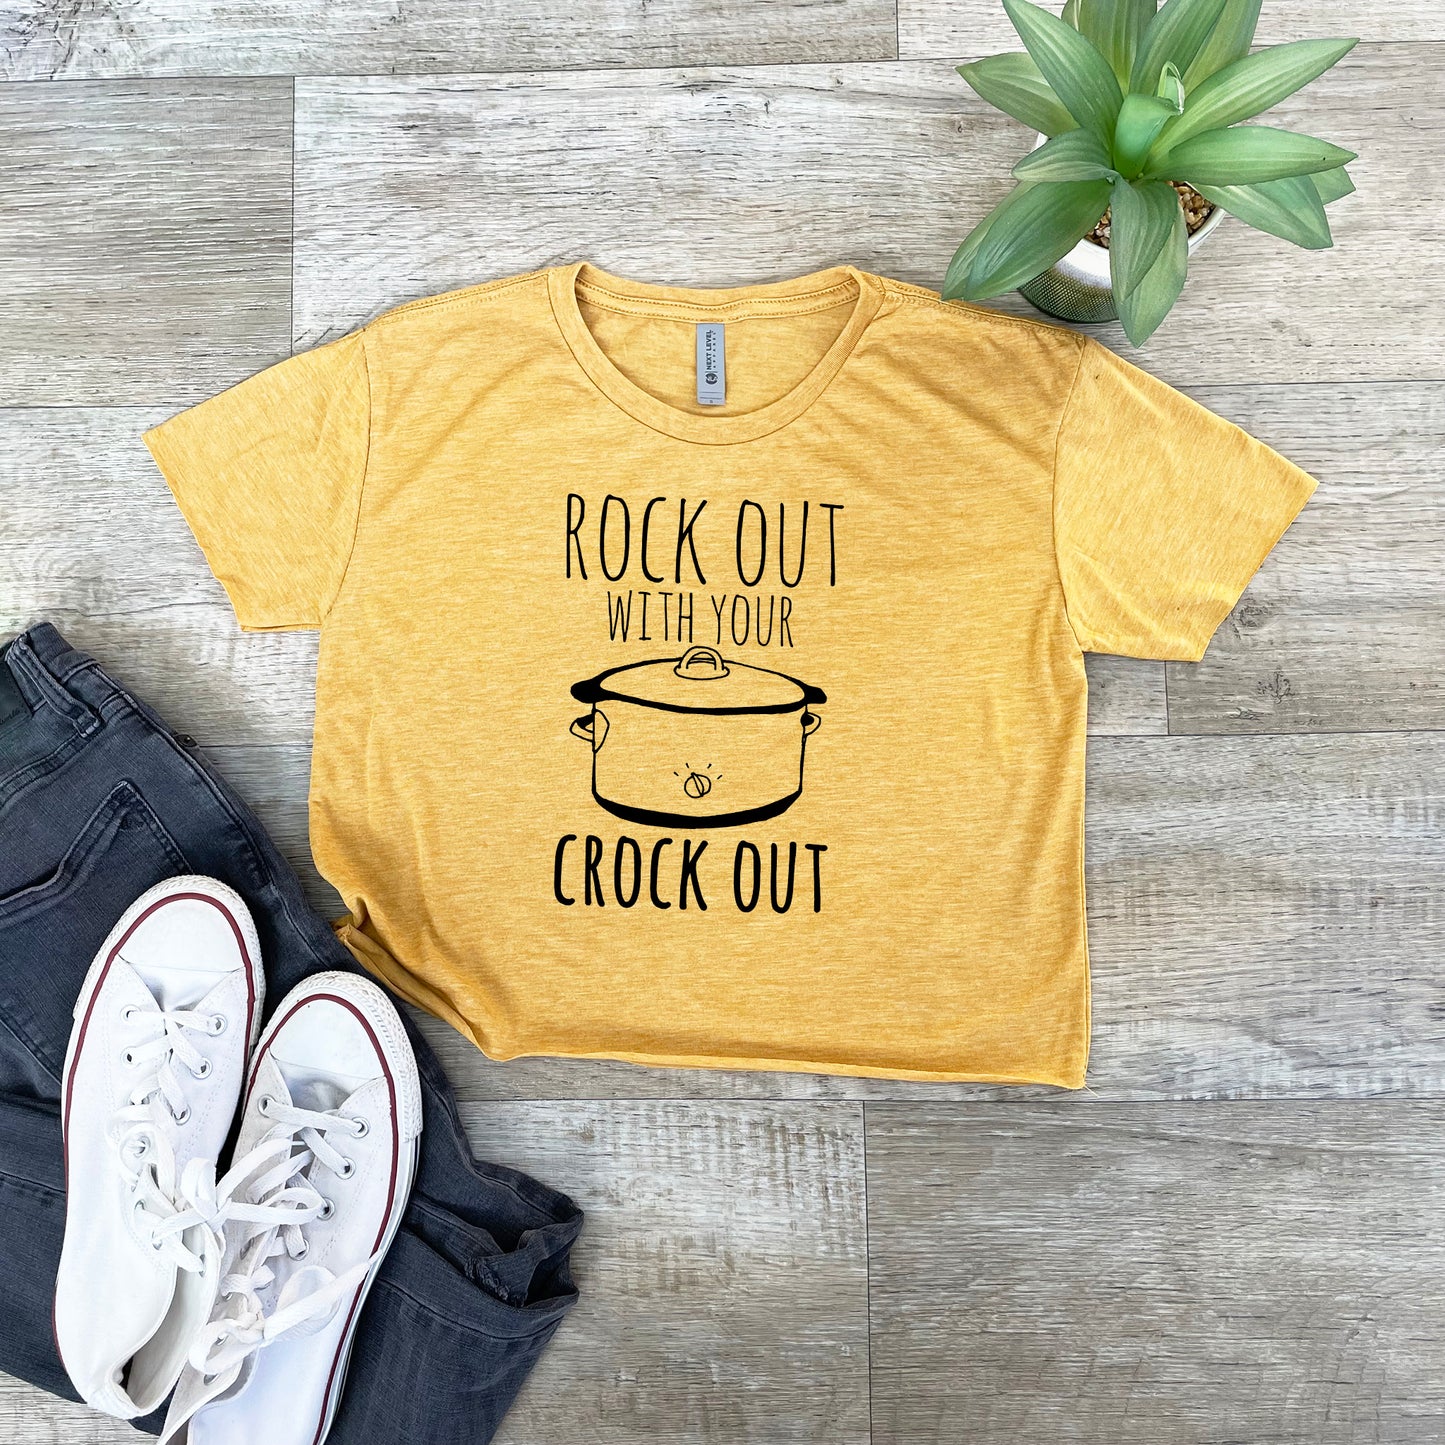 Rock Out With Your Crock Out - Women's Crop Tee - Heather Gray or Gold